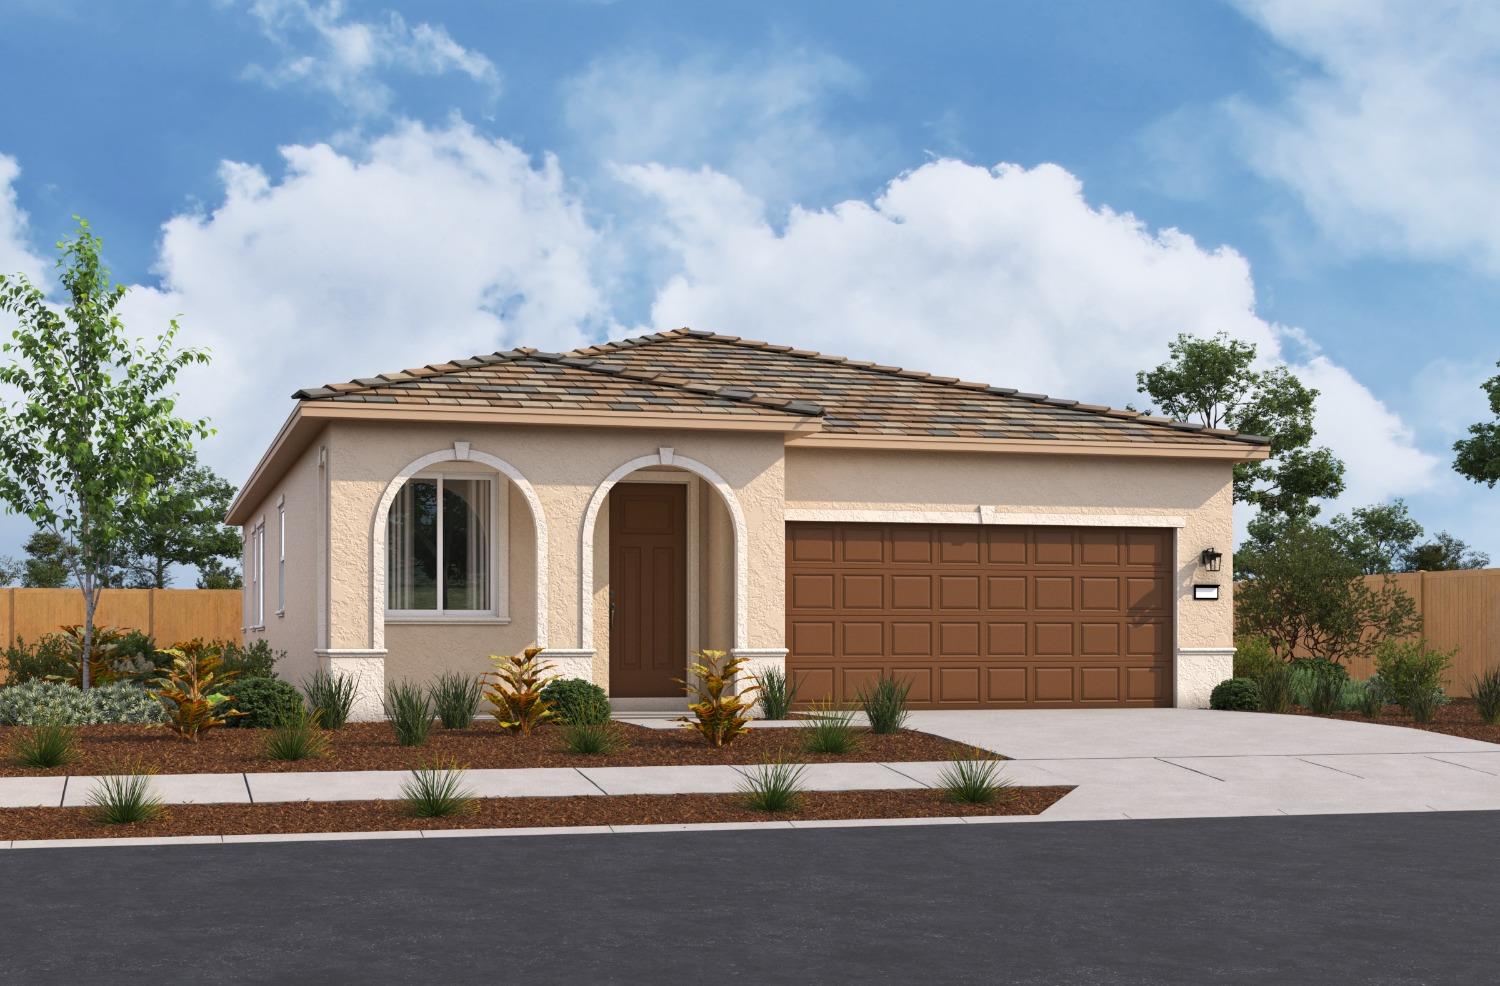 Photo of 8144 Moongate Way, Roseville, CA 95747